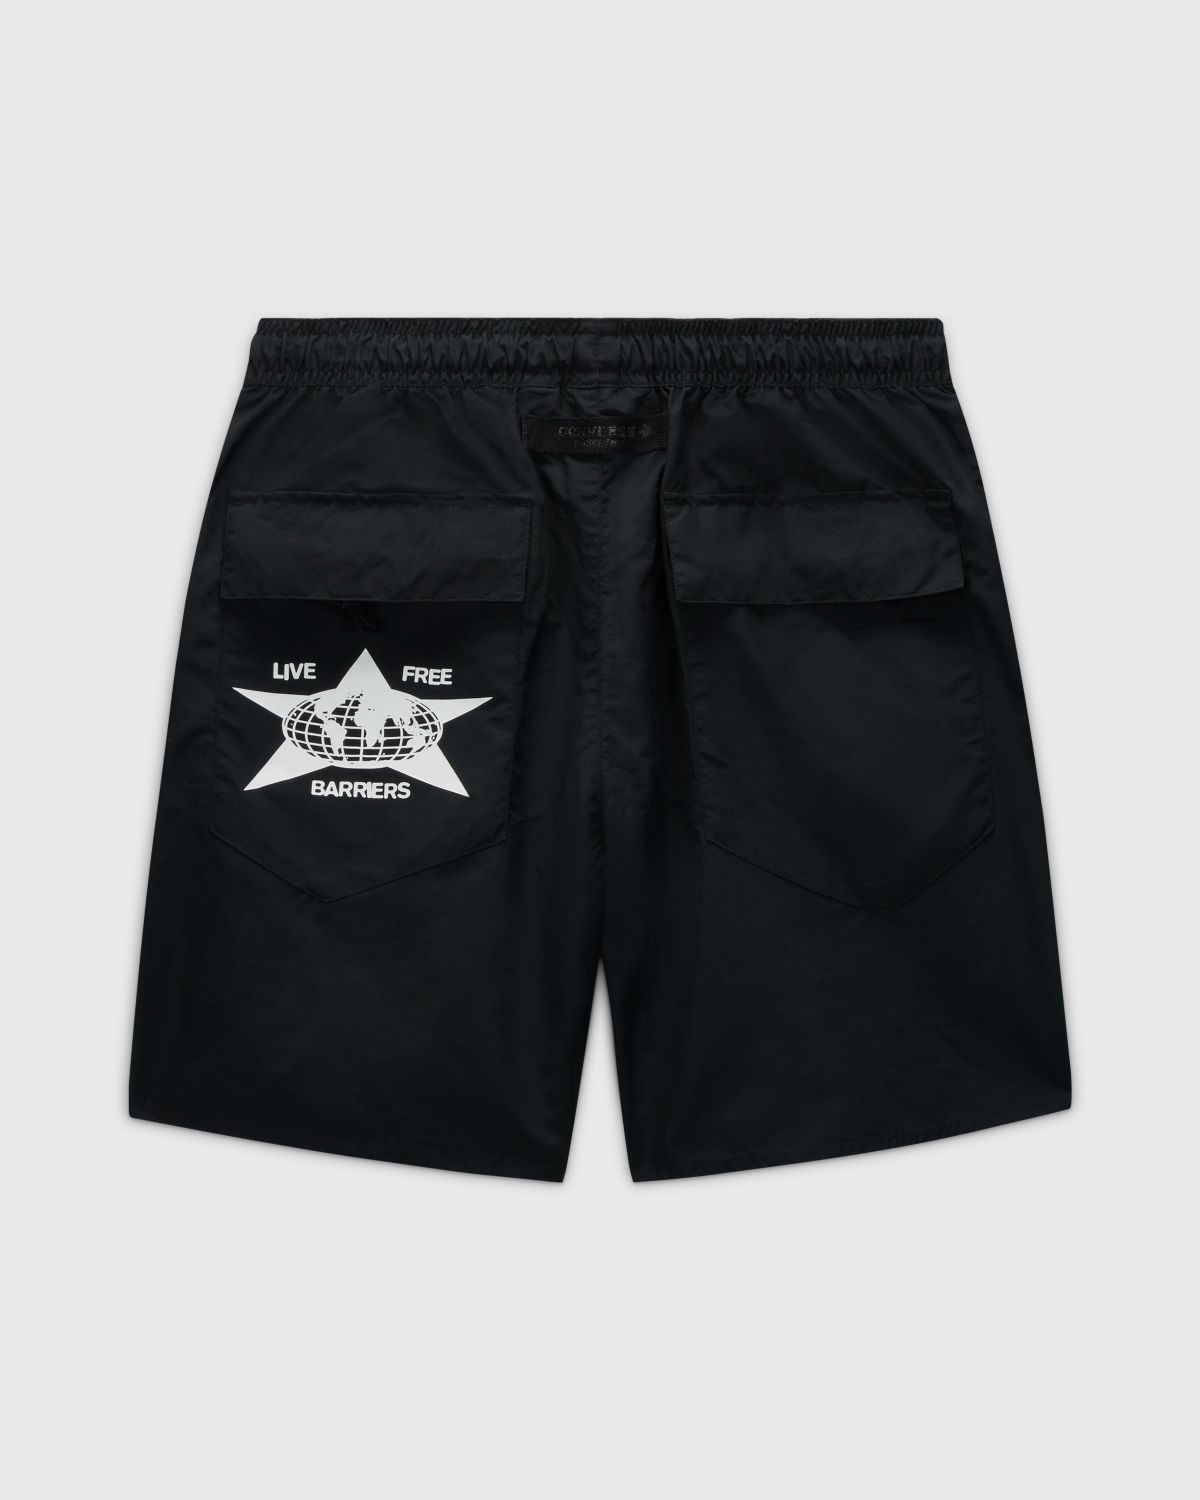 Converse x Barriers – Court Ready Cutter Shorts Black - Shorts - Black - Image 2